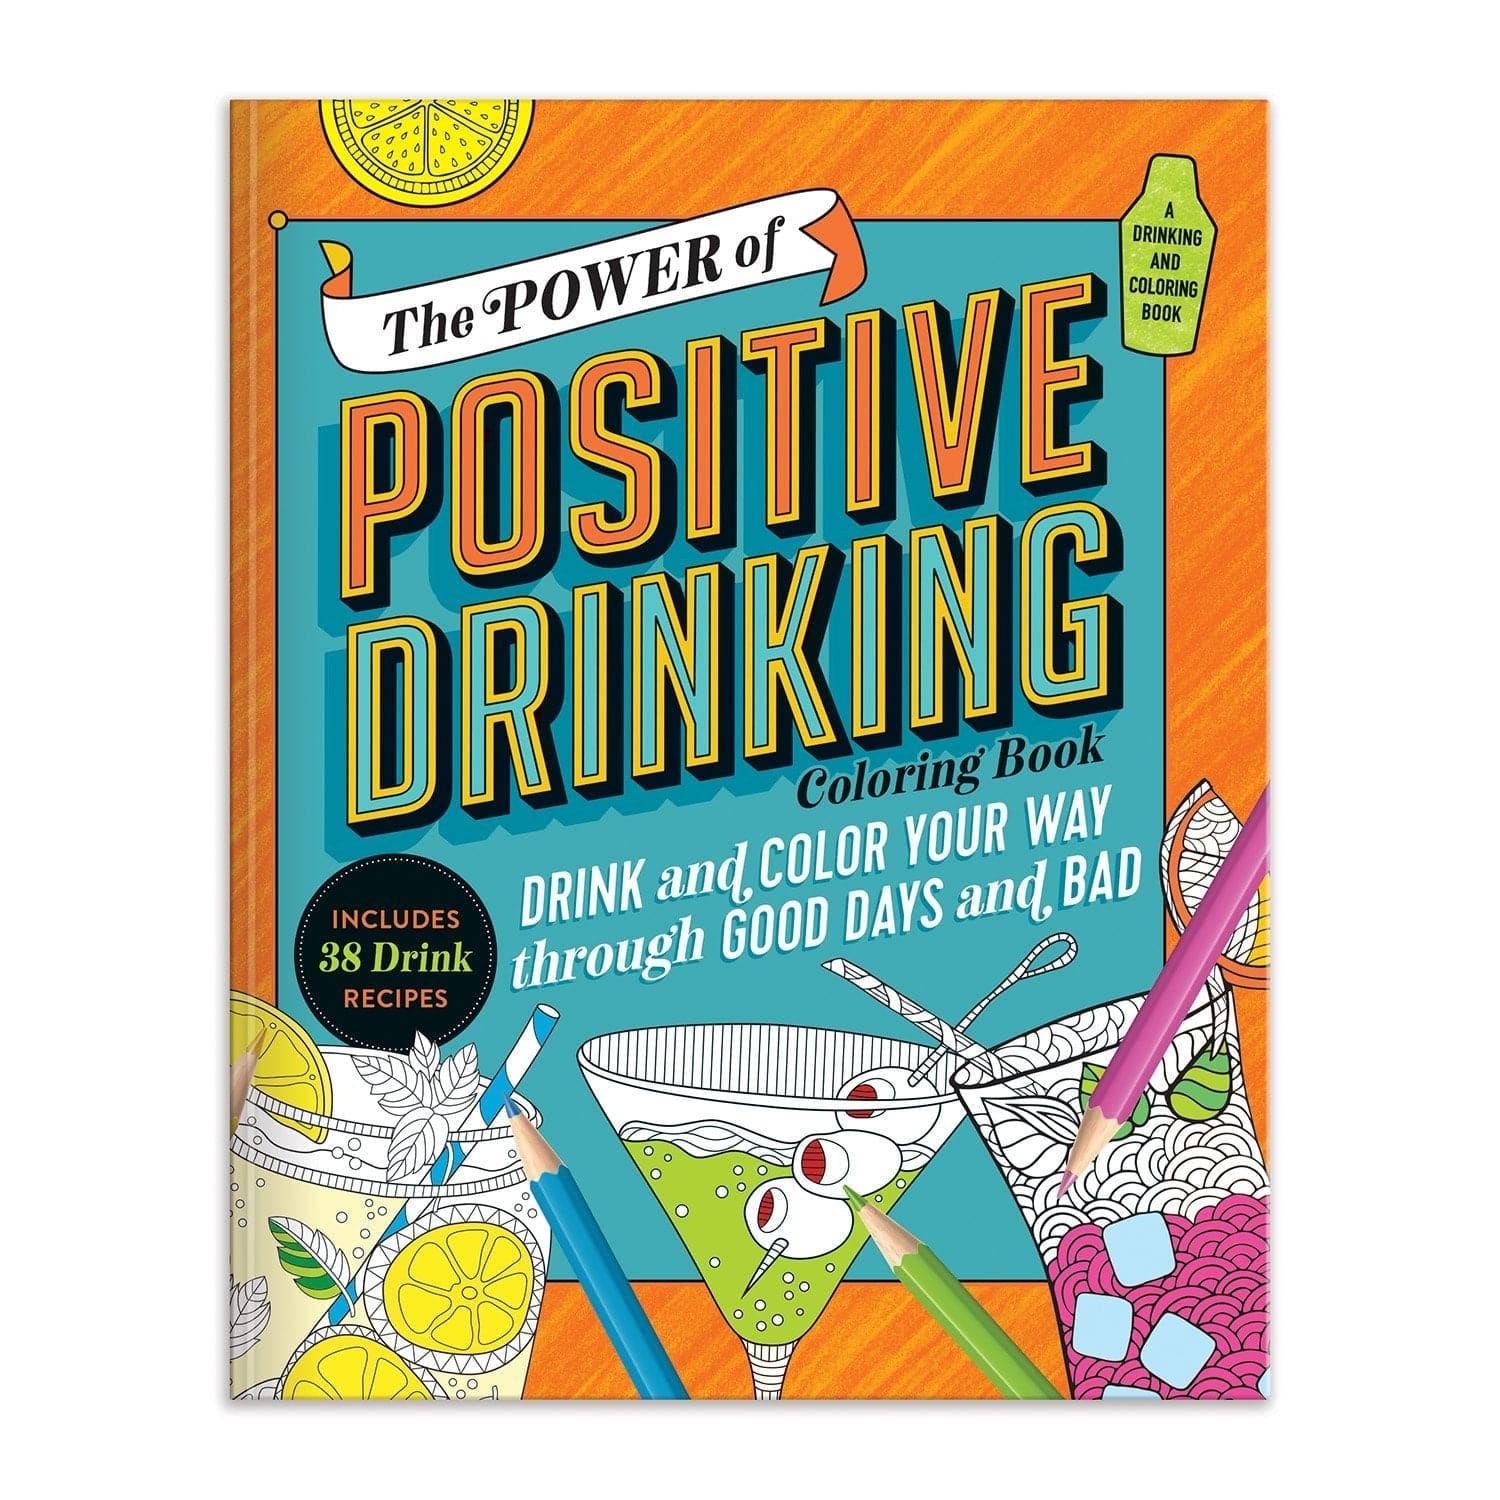 The Power of Positive Drinking Coloring and Cocktail Book The Power of Positive Drinking Coloring and Cocktail Book The Power of Positive Drinking Coloring and Cocktail Book 